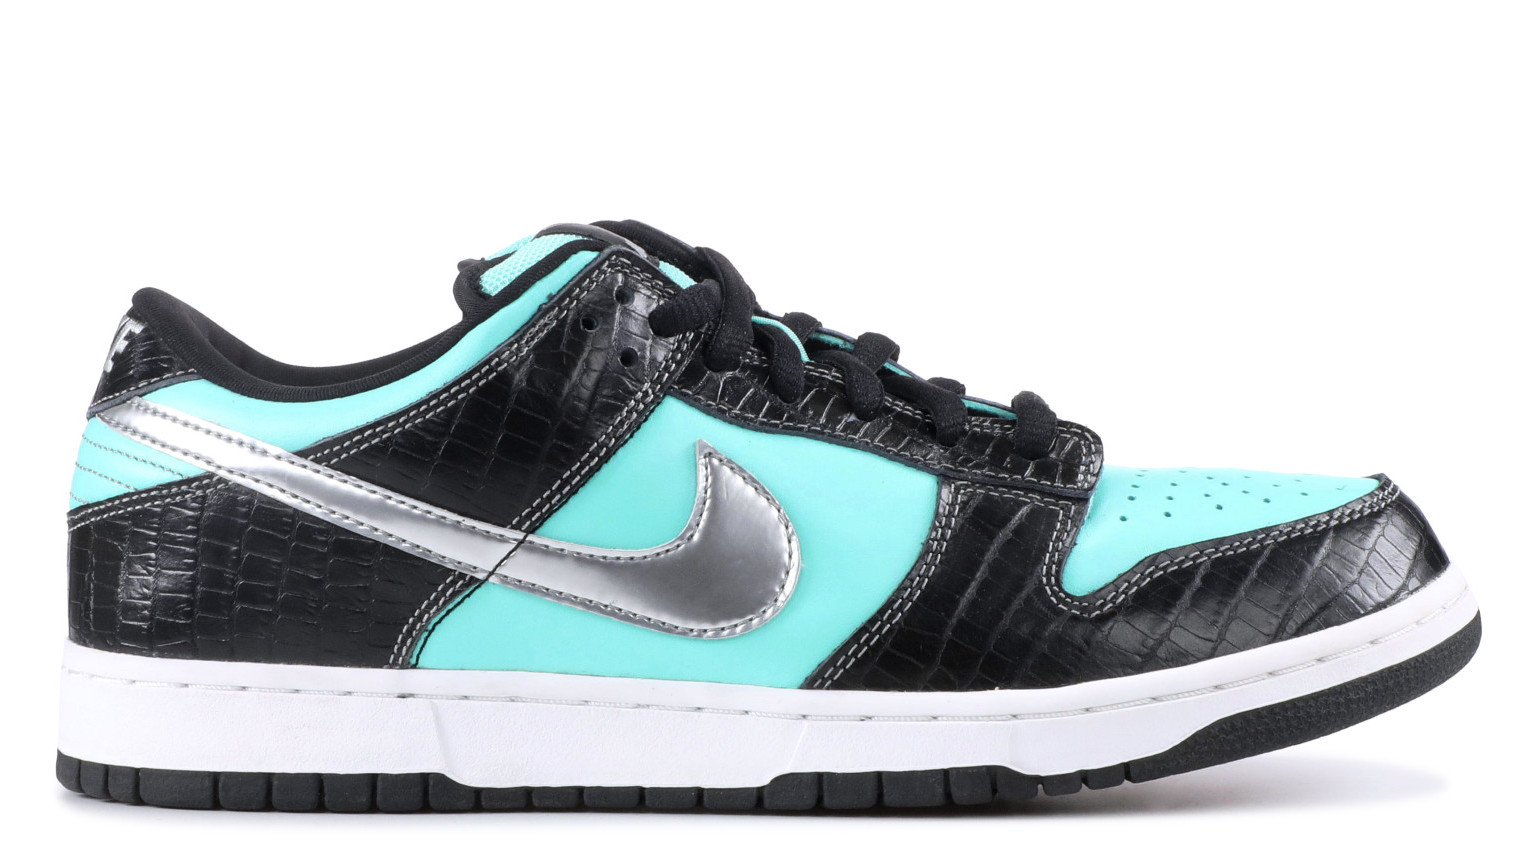 Montaña hacer los deberes Mathis How the Tiffany Dunk Became One of the Most Hyped Sneakers Ever | Sole  Collector